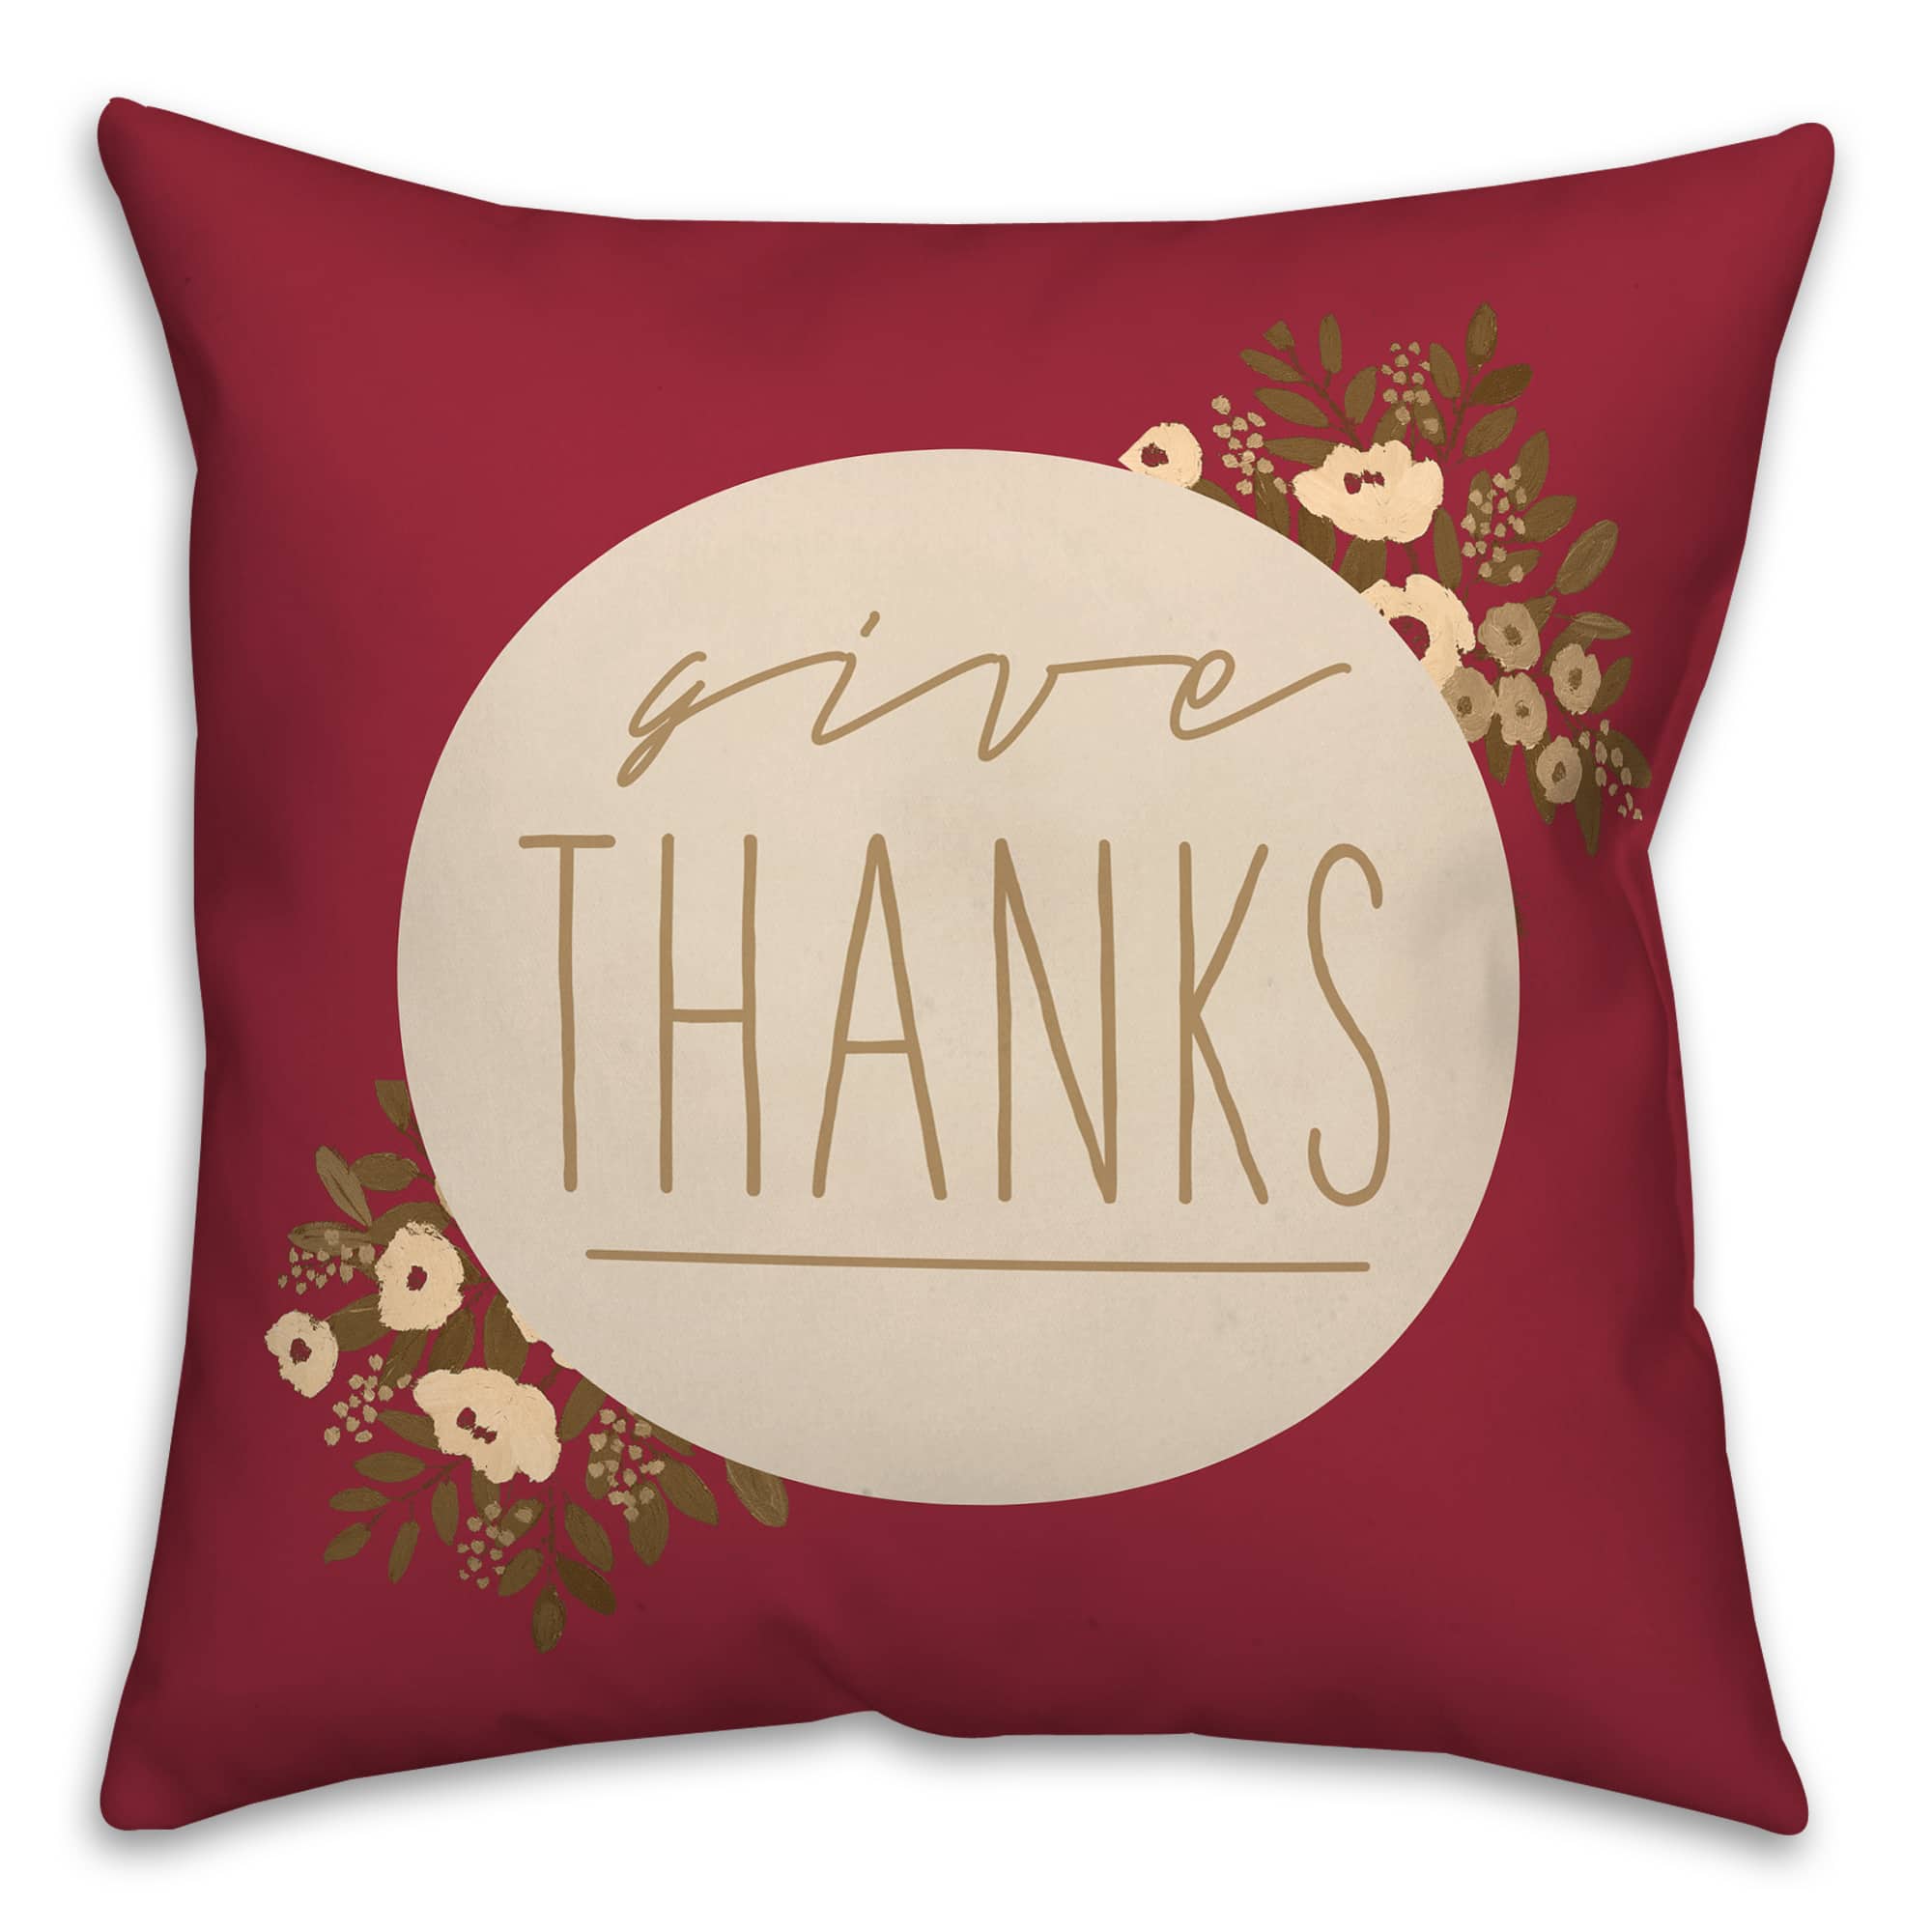 Give Thanks Floral Throw Pillow